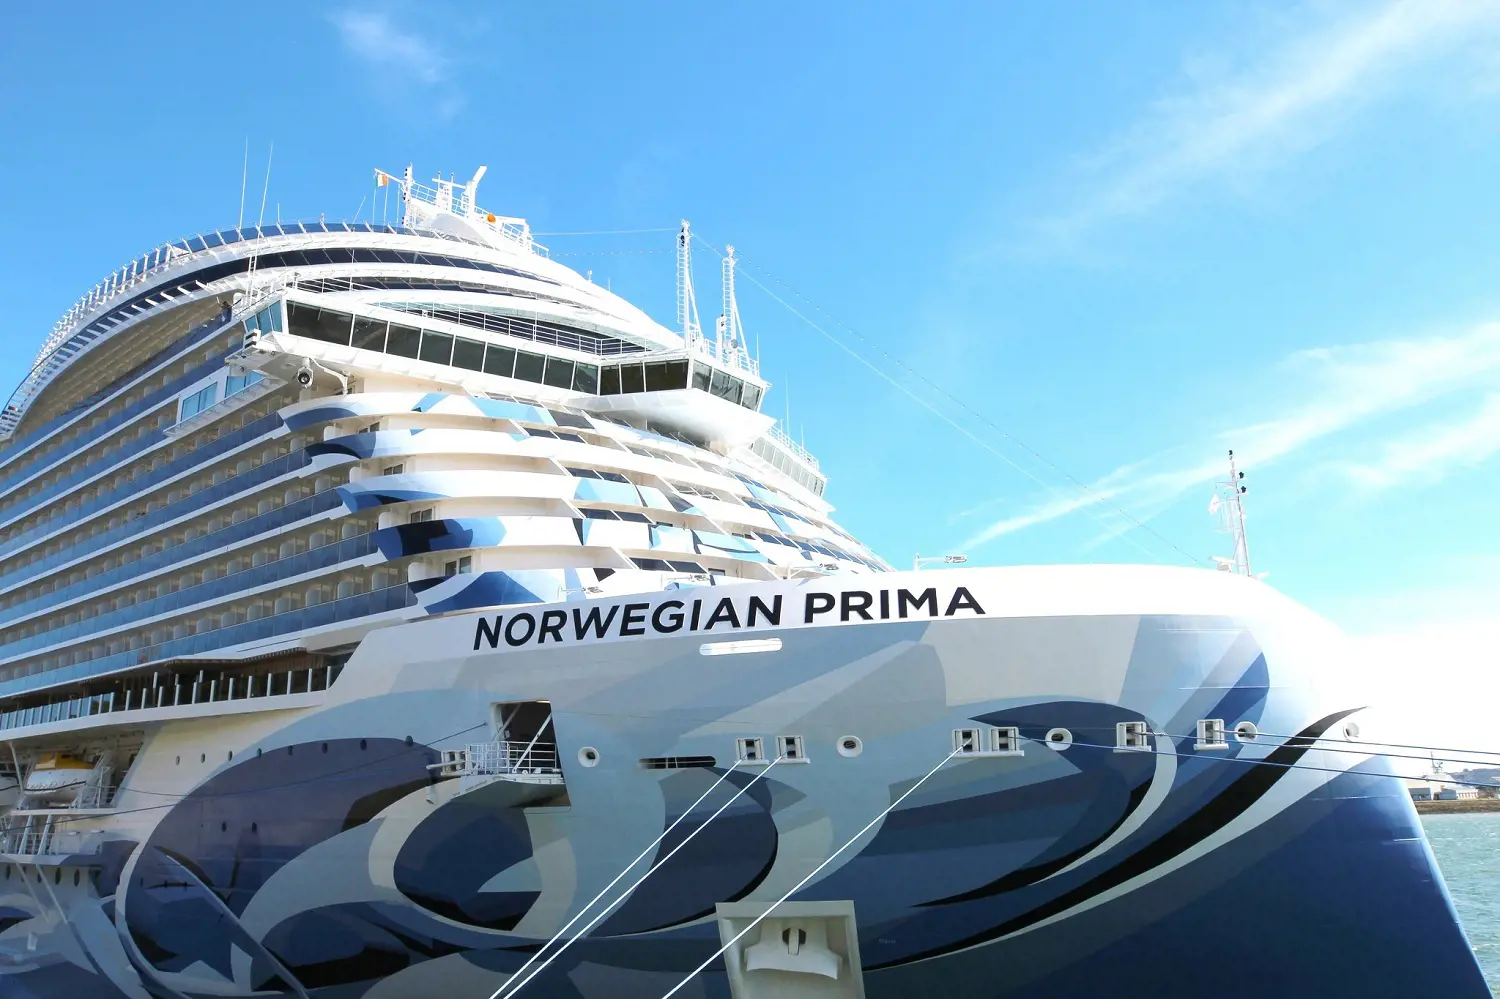 Norwegian Prima was introduced as Prima Class ship in 2022